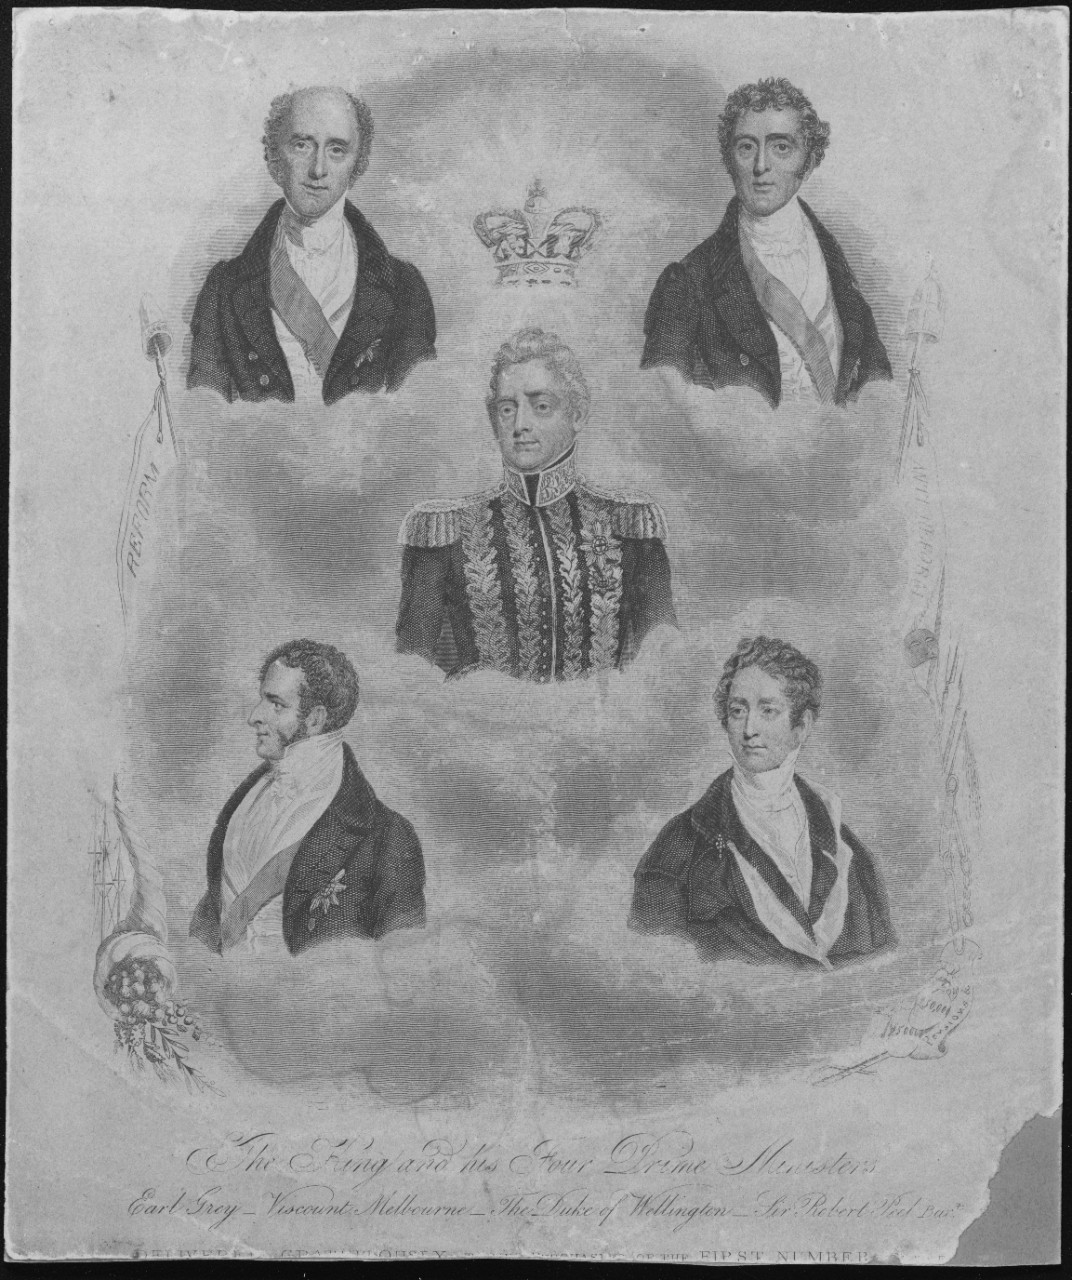 King William IV and his four Prime Ministers